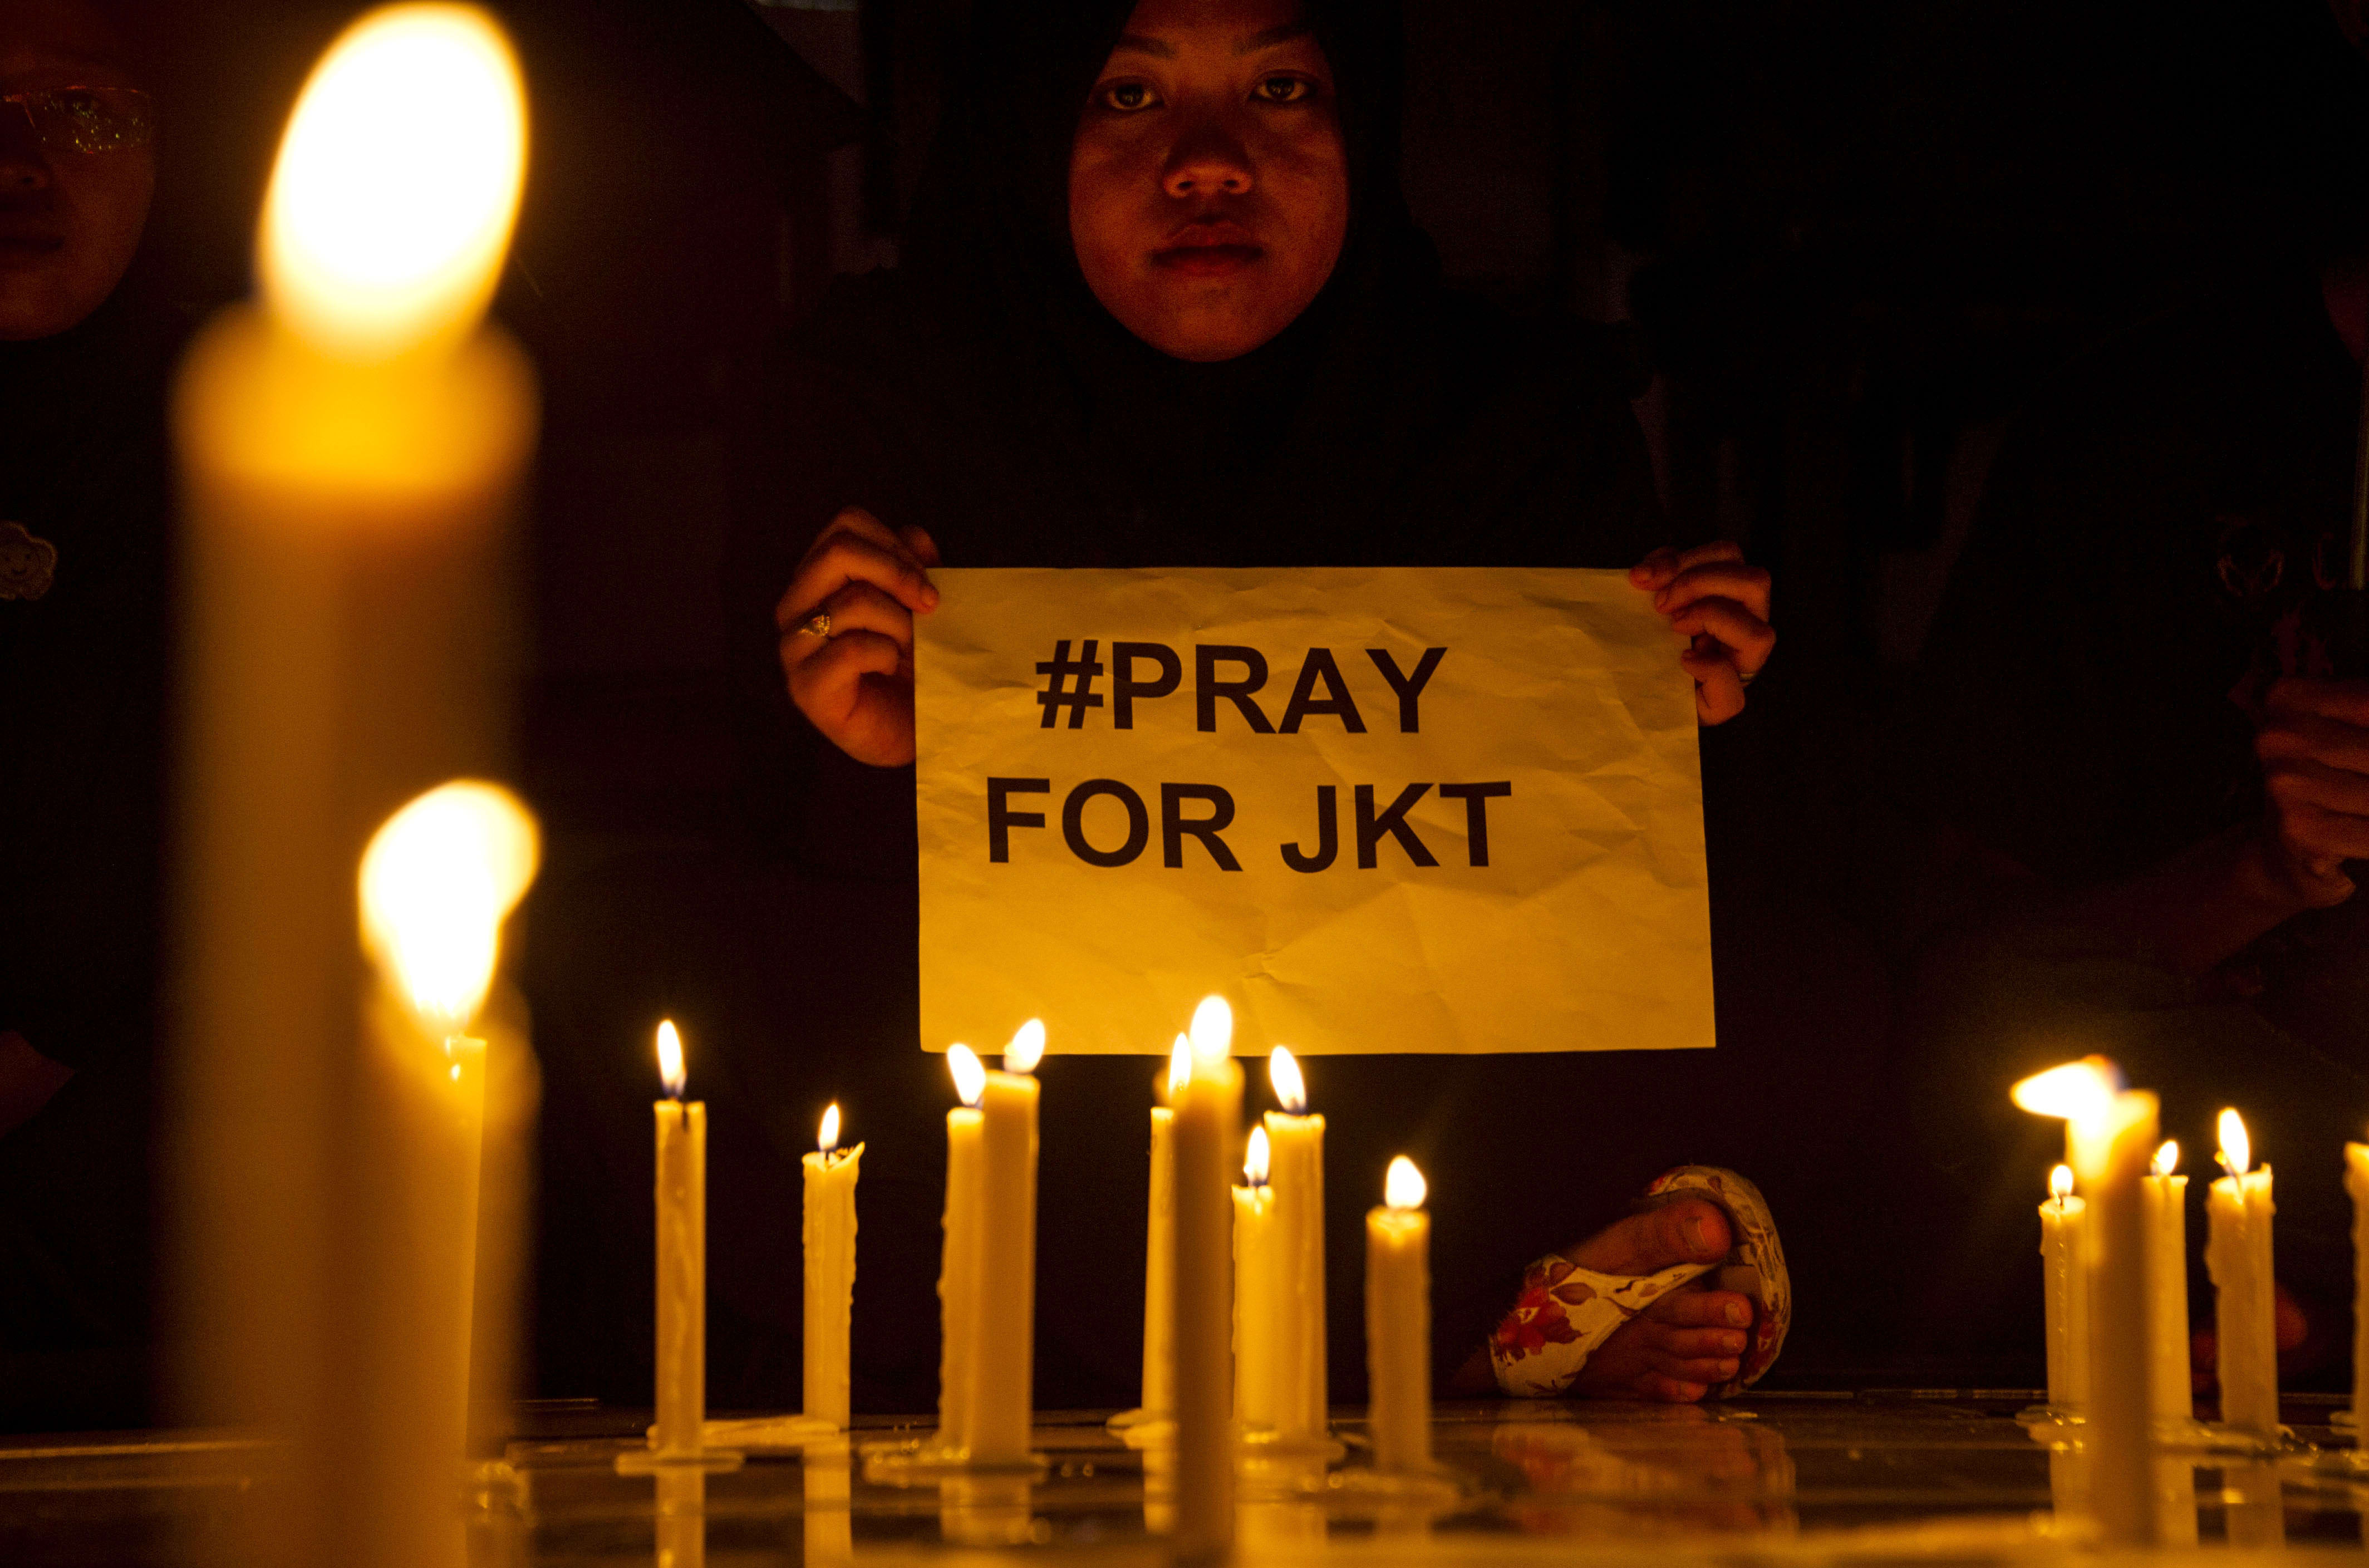 A candlelit protest was held in Surabaya, Eastern Java island to condemn the Jakarta attacks.